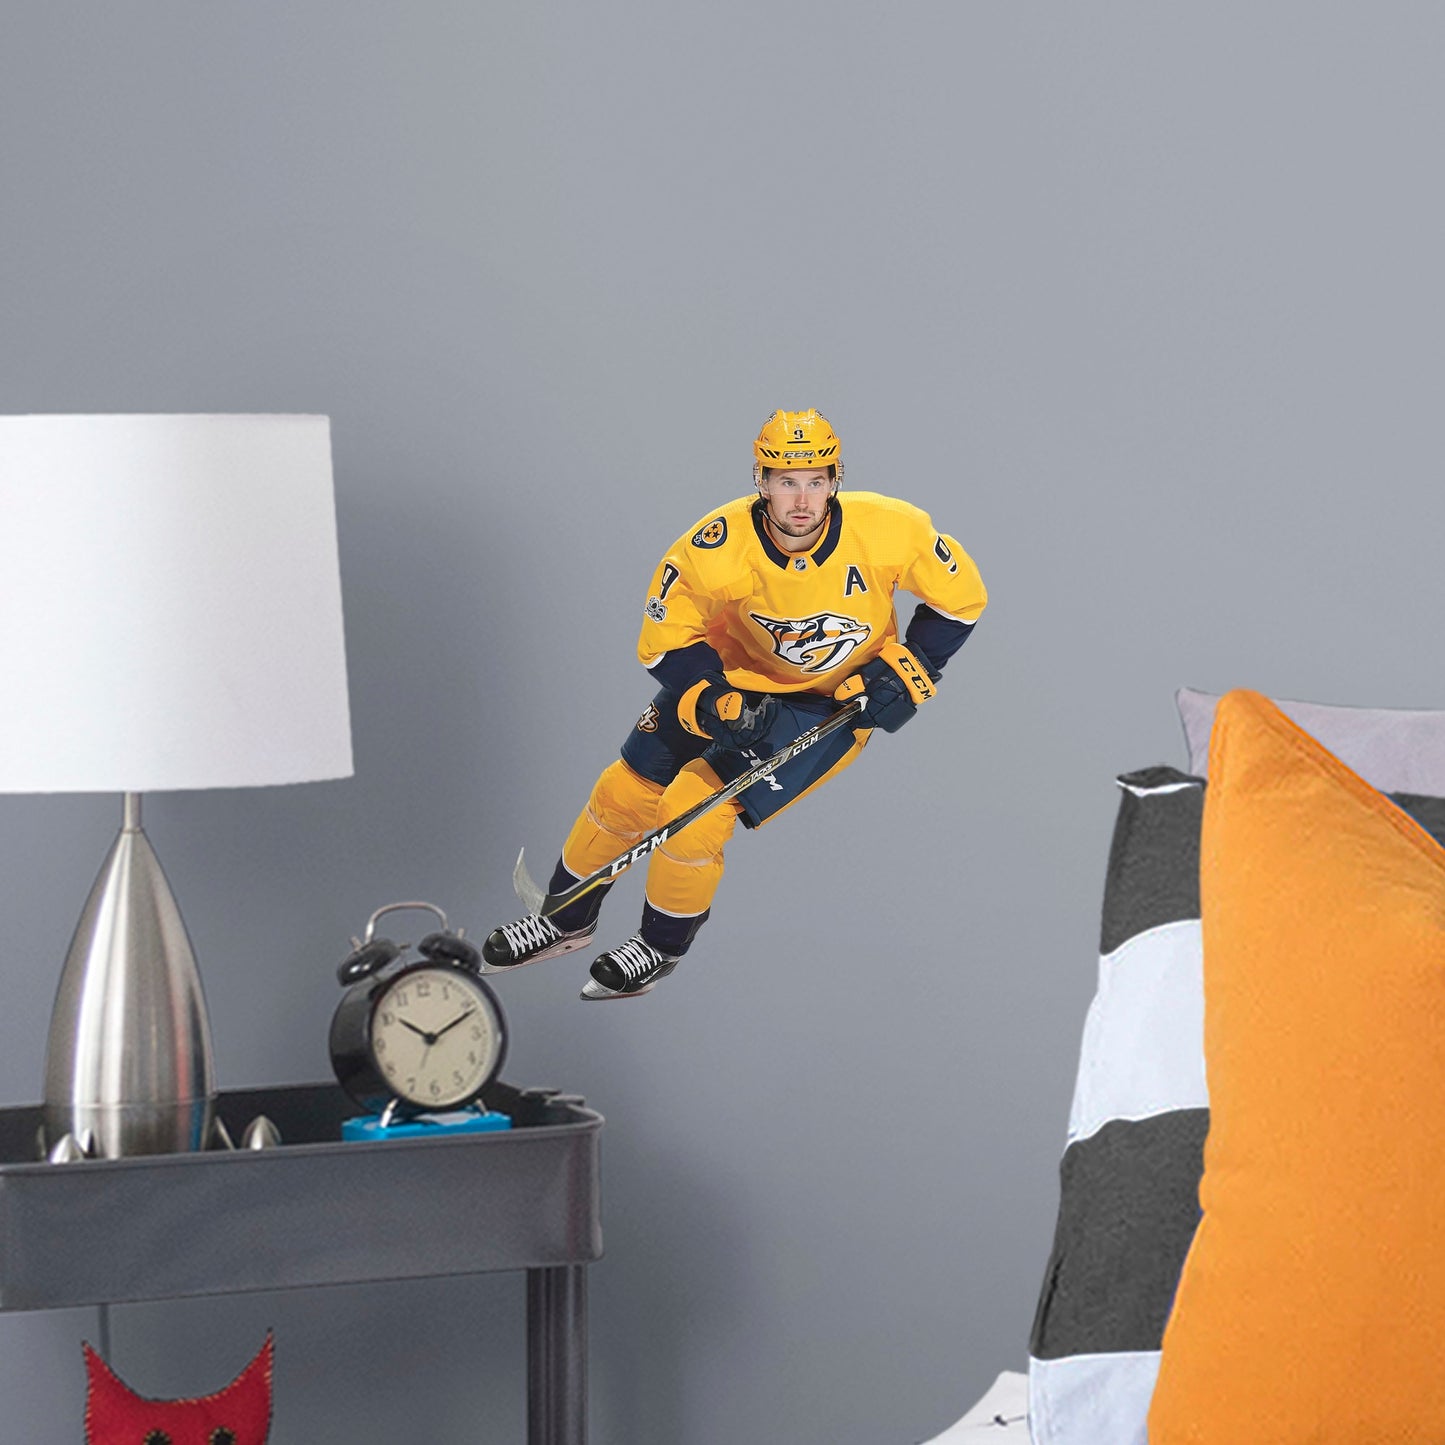 Large Athlete + 2 Decals (14"W x 16"H) Filip Forsberg has been a force in the NHL since he was first drafted in 2012 and now you can bring him to life in your home with this Officially Licensed NHL Removable Wall Decal! Pictured here in action on the ice, this durable and reusable wall decal is sure to standout in your bedroom, office, or fan room!